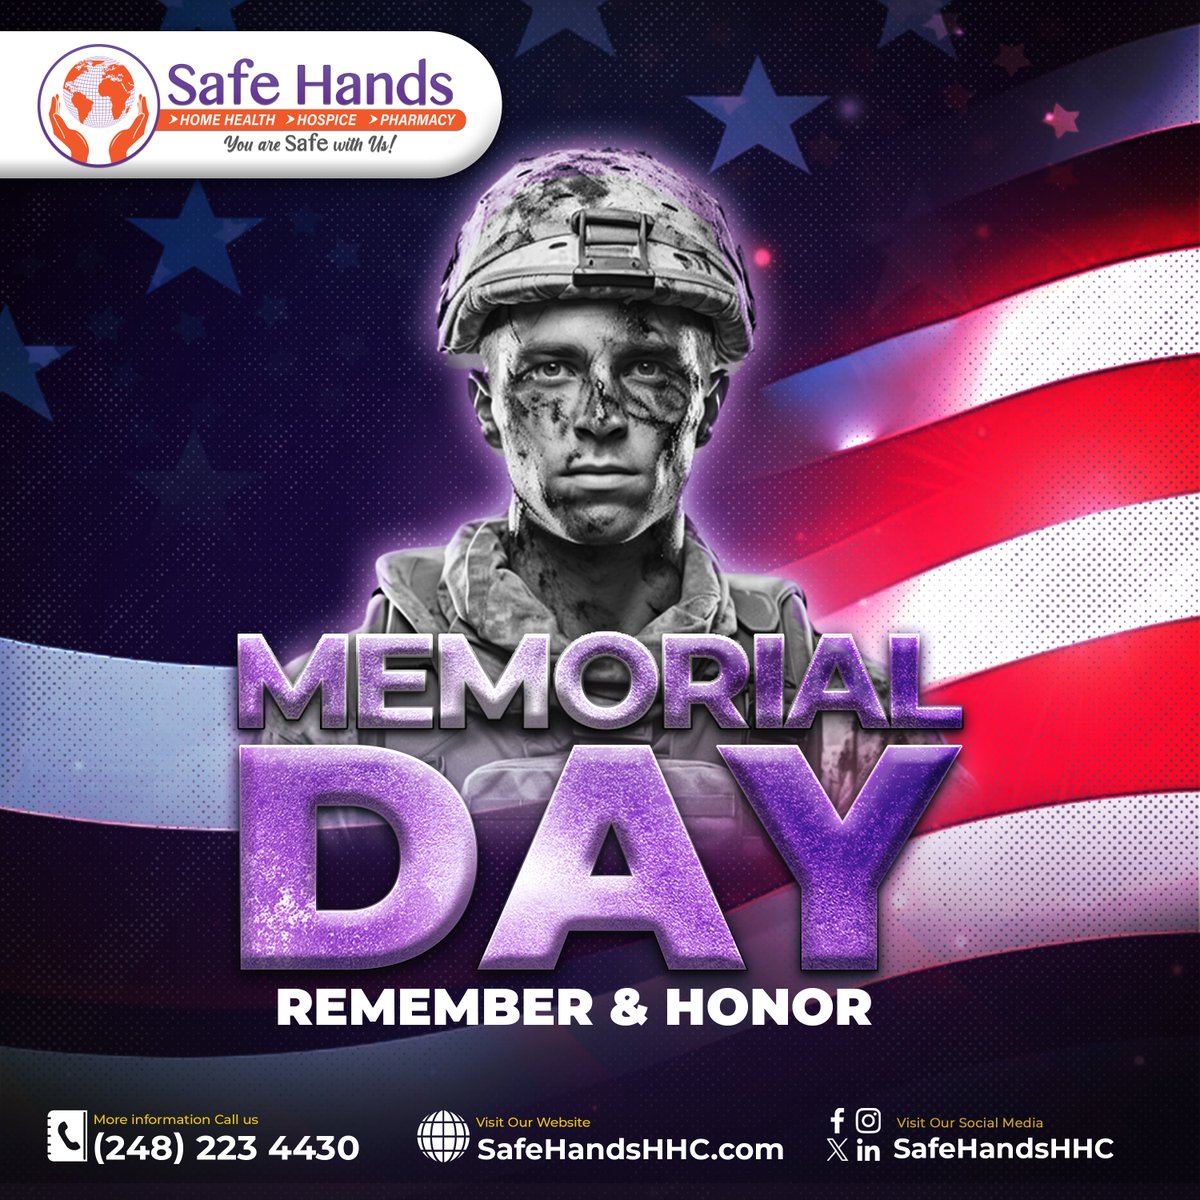 Today, we pause to honor the brave souls who gave everything for our freedom.
Feel free to contact us now: +1 (248) 223-4430
or
Visit us: safehandshhc.com
#SafeHandsHHC #MemorialDay #RememberAndHonor #HeroesAmongUs #MilitaryHonor #USVeterans #FreedomIsntFree #ThankYouHeros